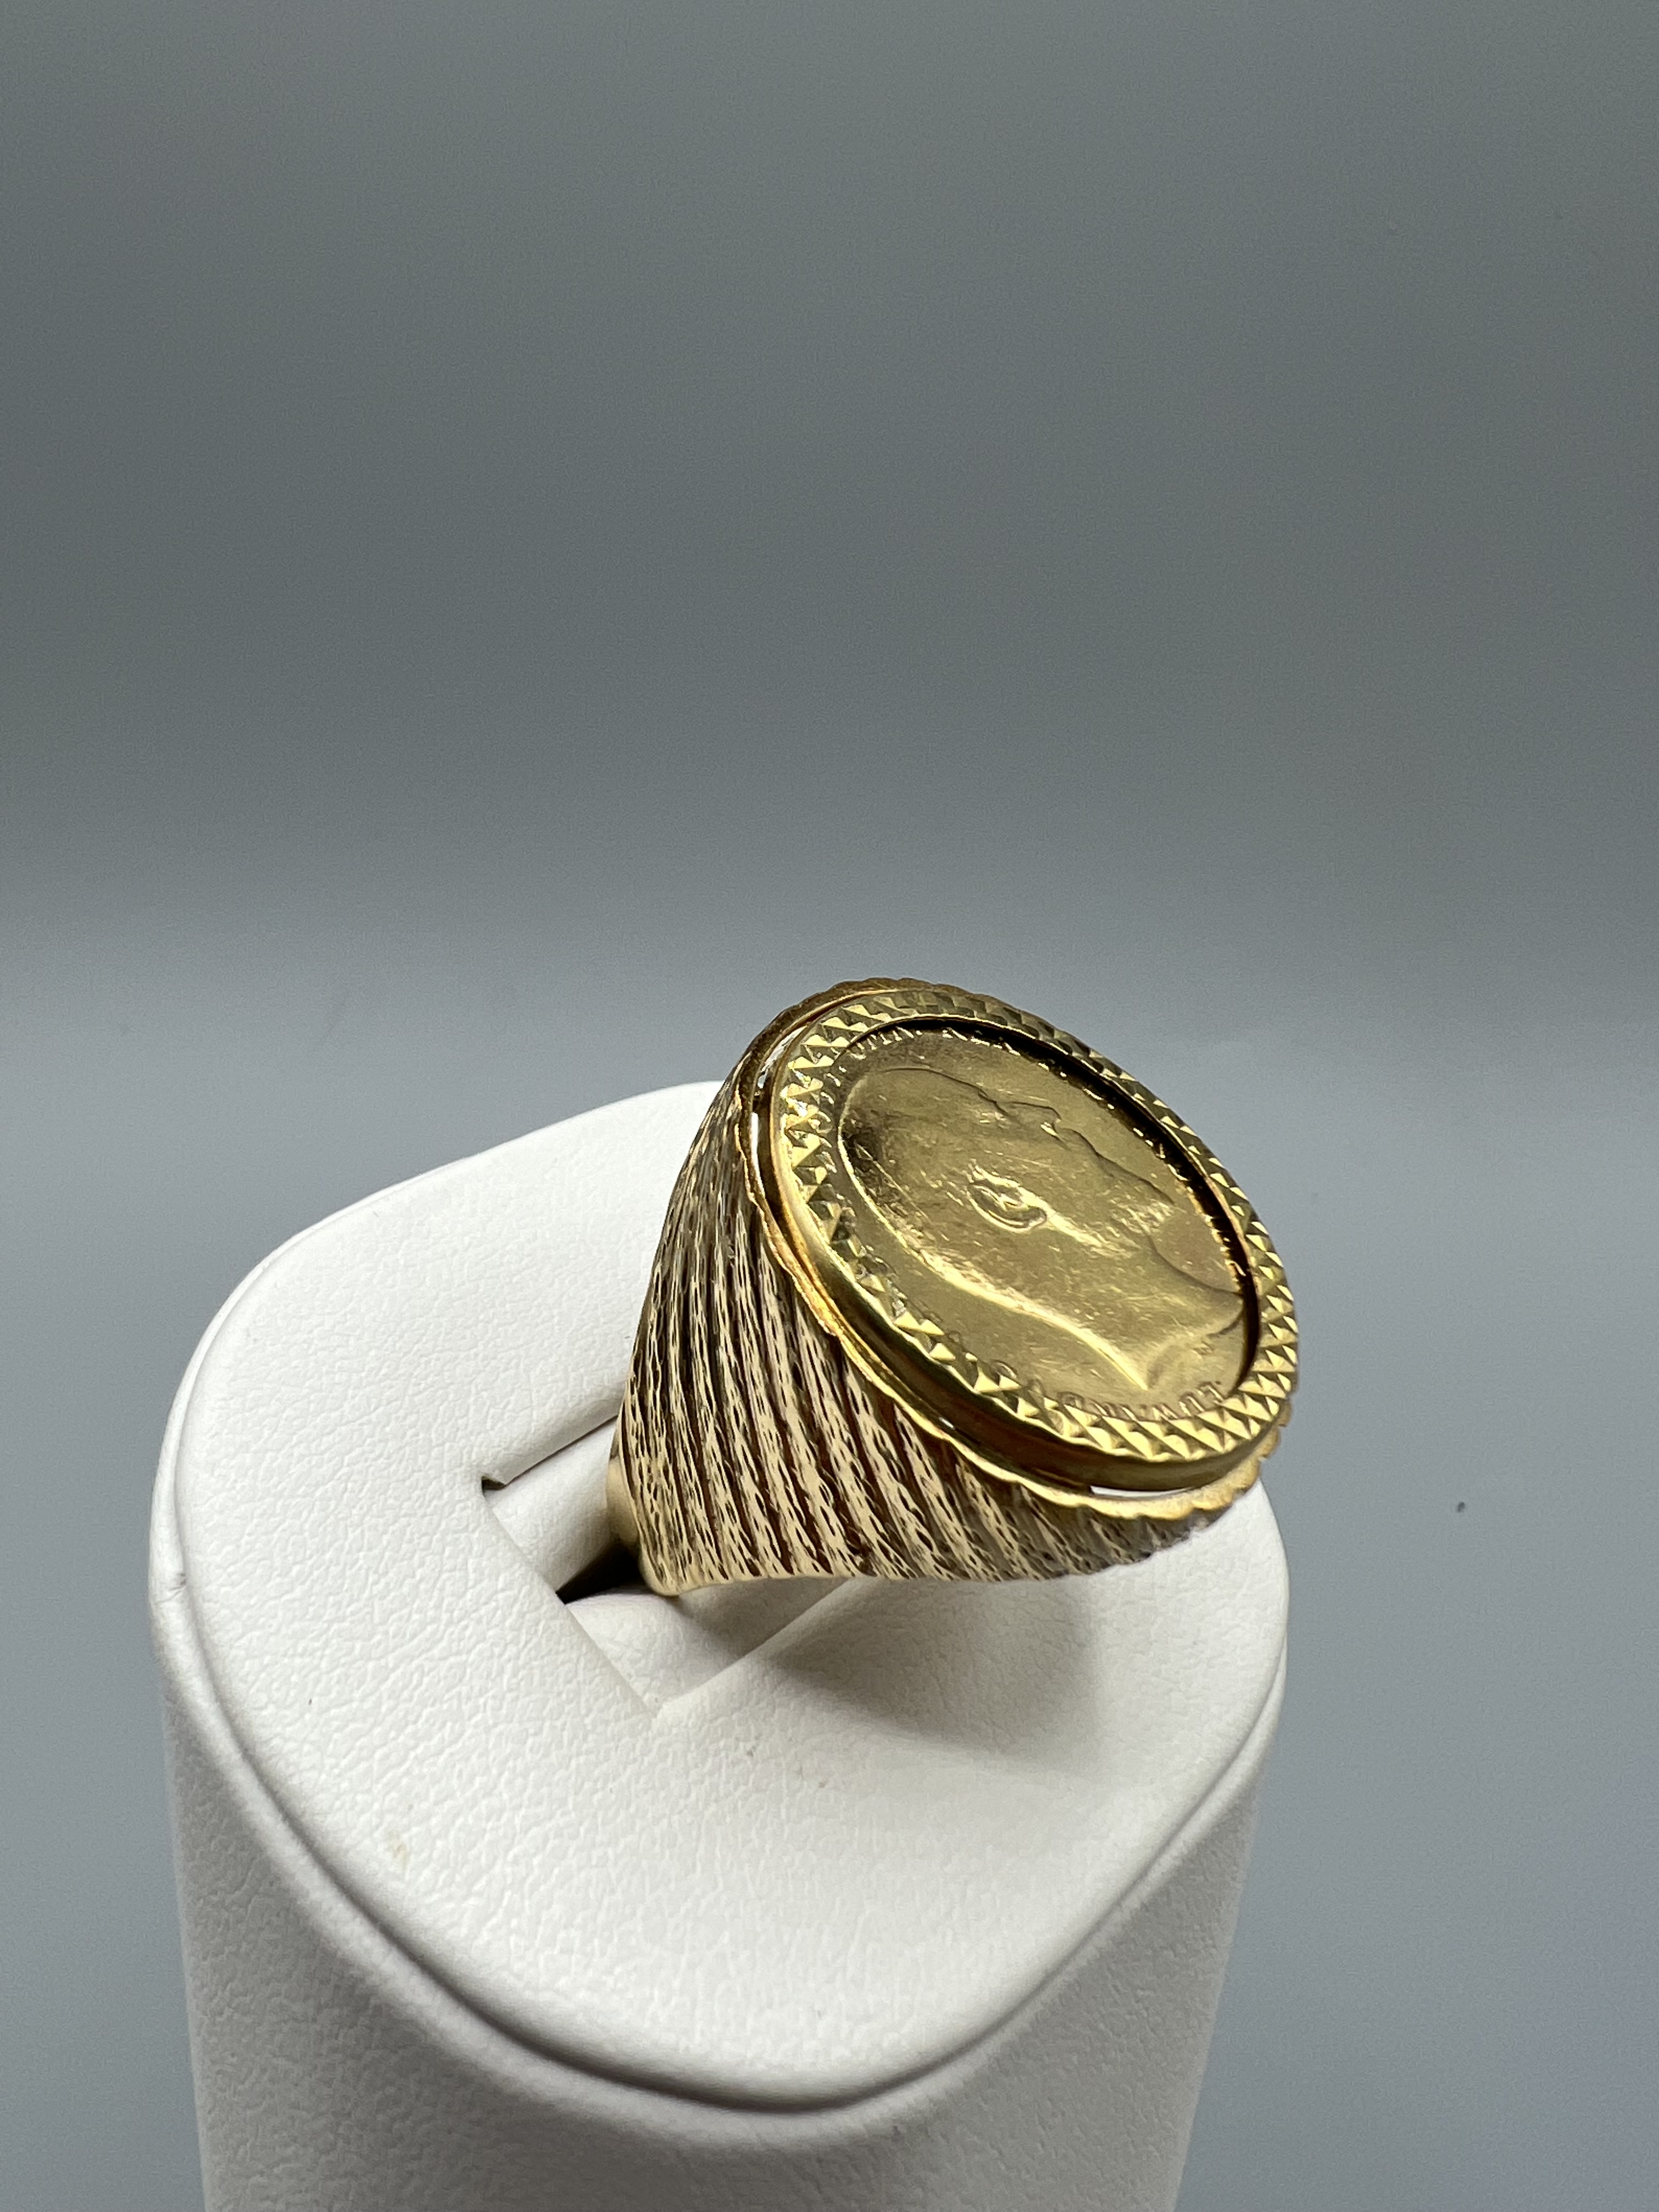 1910 Edward Vii Full Soverign Ring in 9ct Gold Mount Size X - 15.5grams